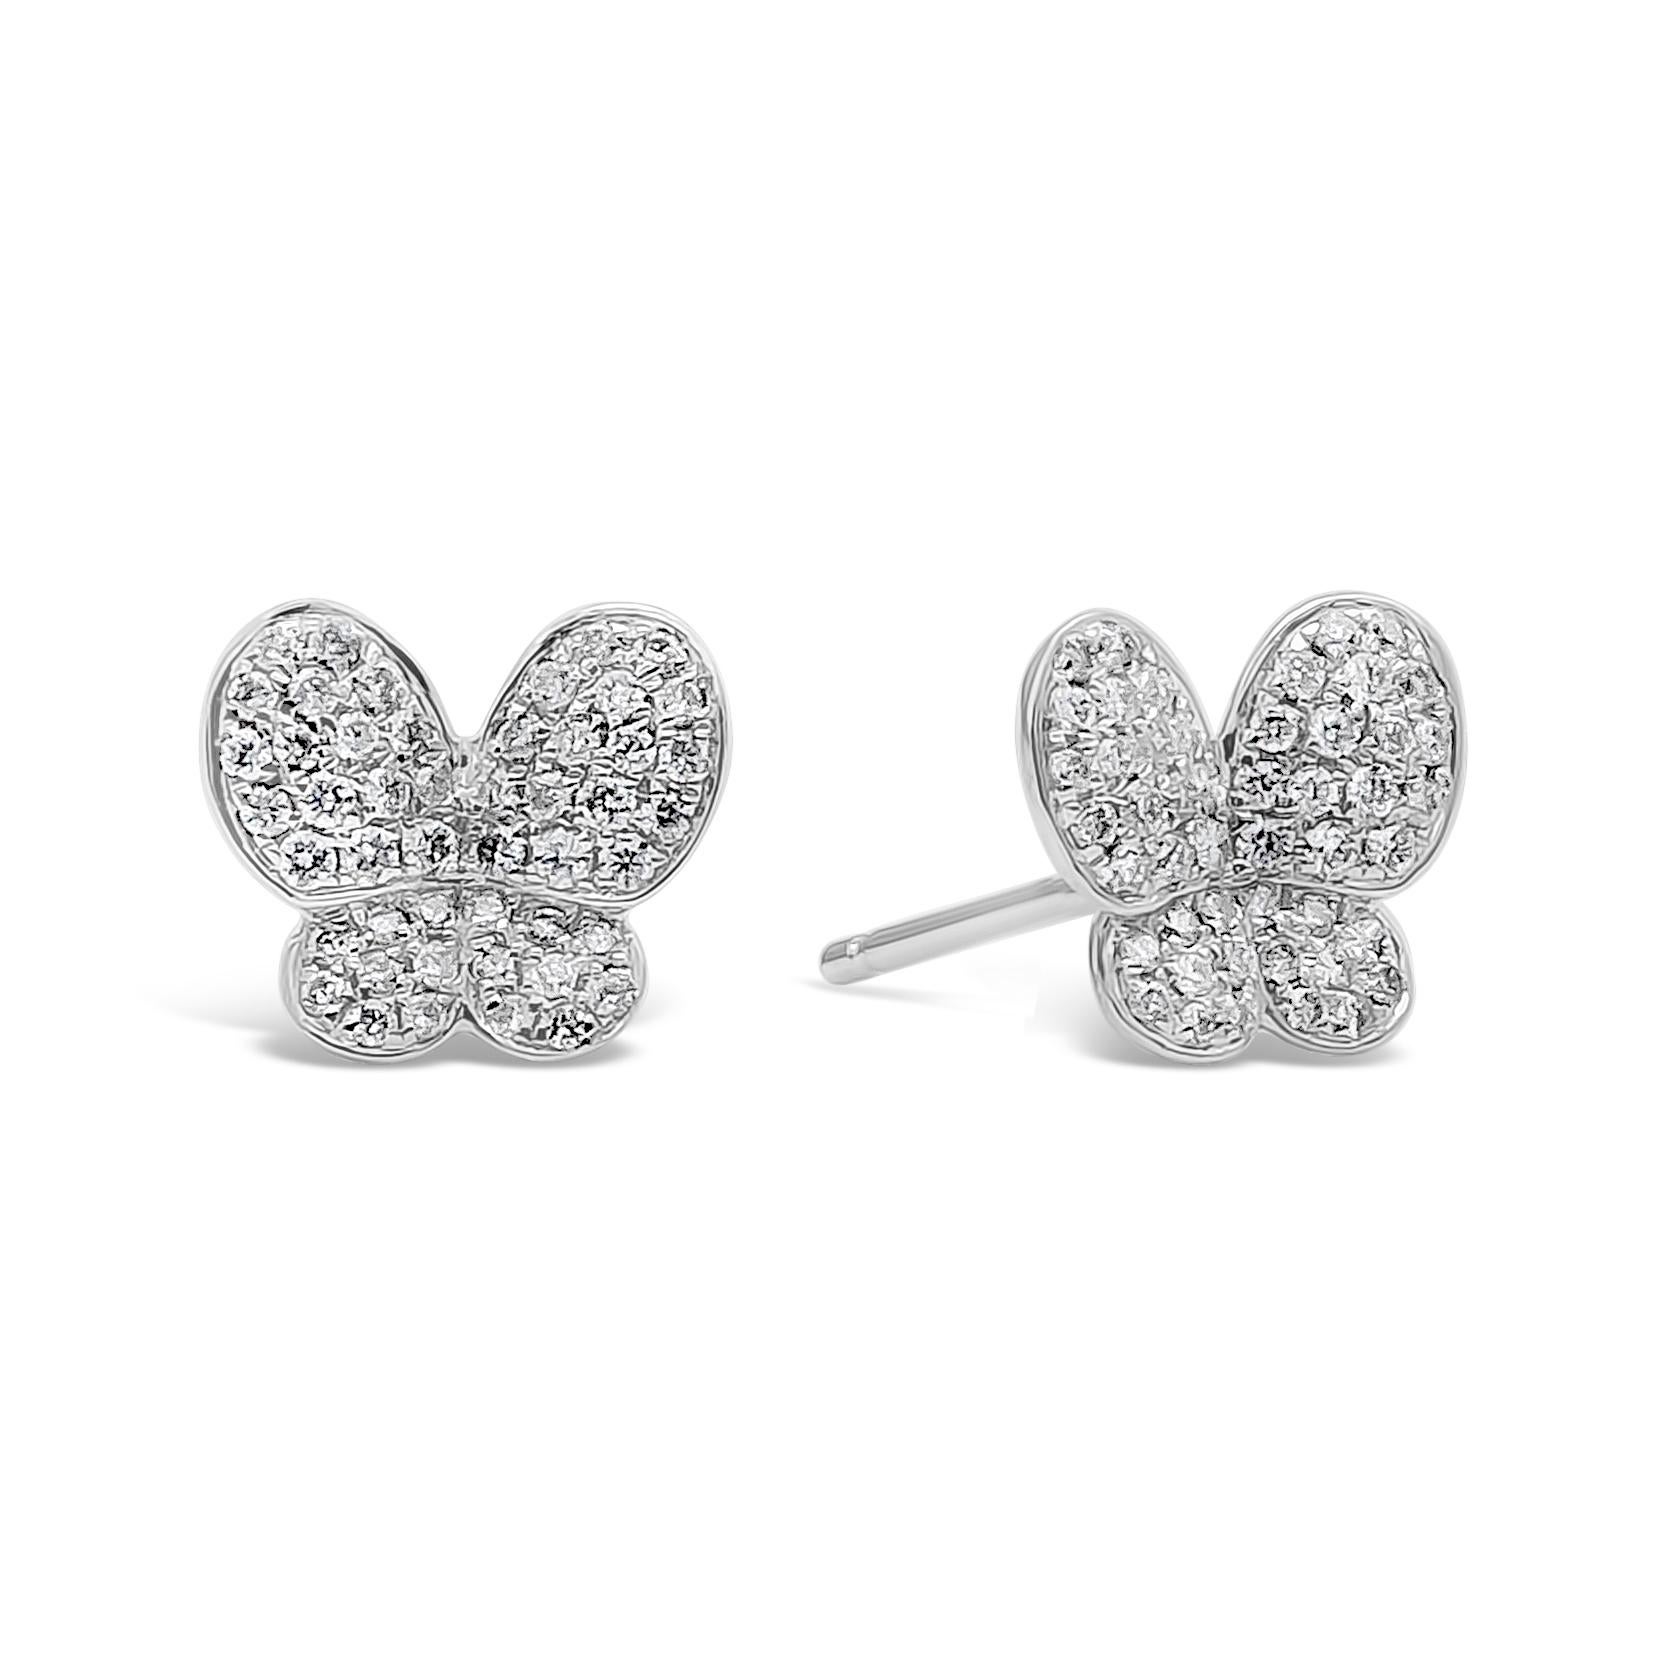 A unique and simple pair of stud earrings featuring a cluster of 96 brilliant round diamonds, micro-pave set in a butterfly motif setting made in 18k white gold. Diamonds weigh 0.30 carats total, F Color, VS-SI in Clarity. A perfect everyday piece